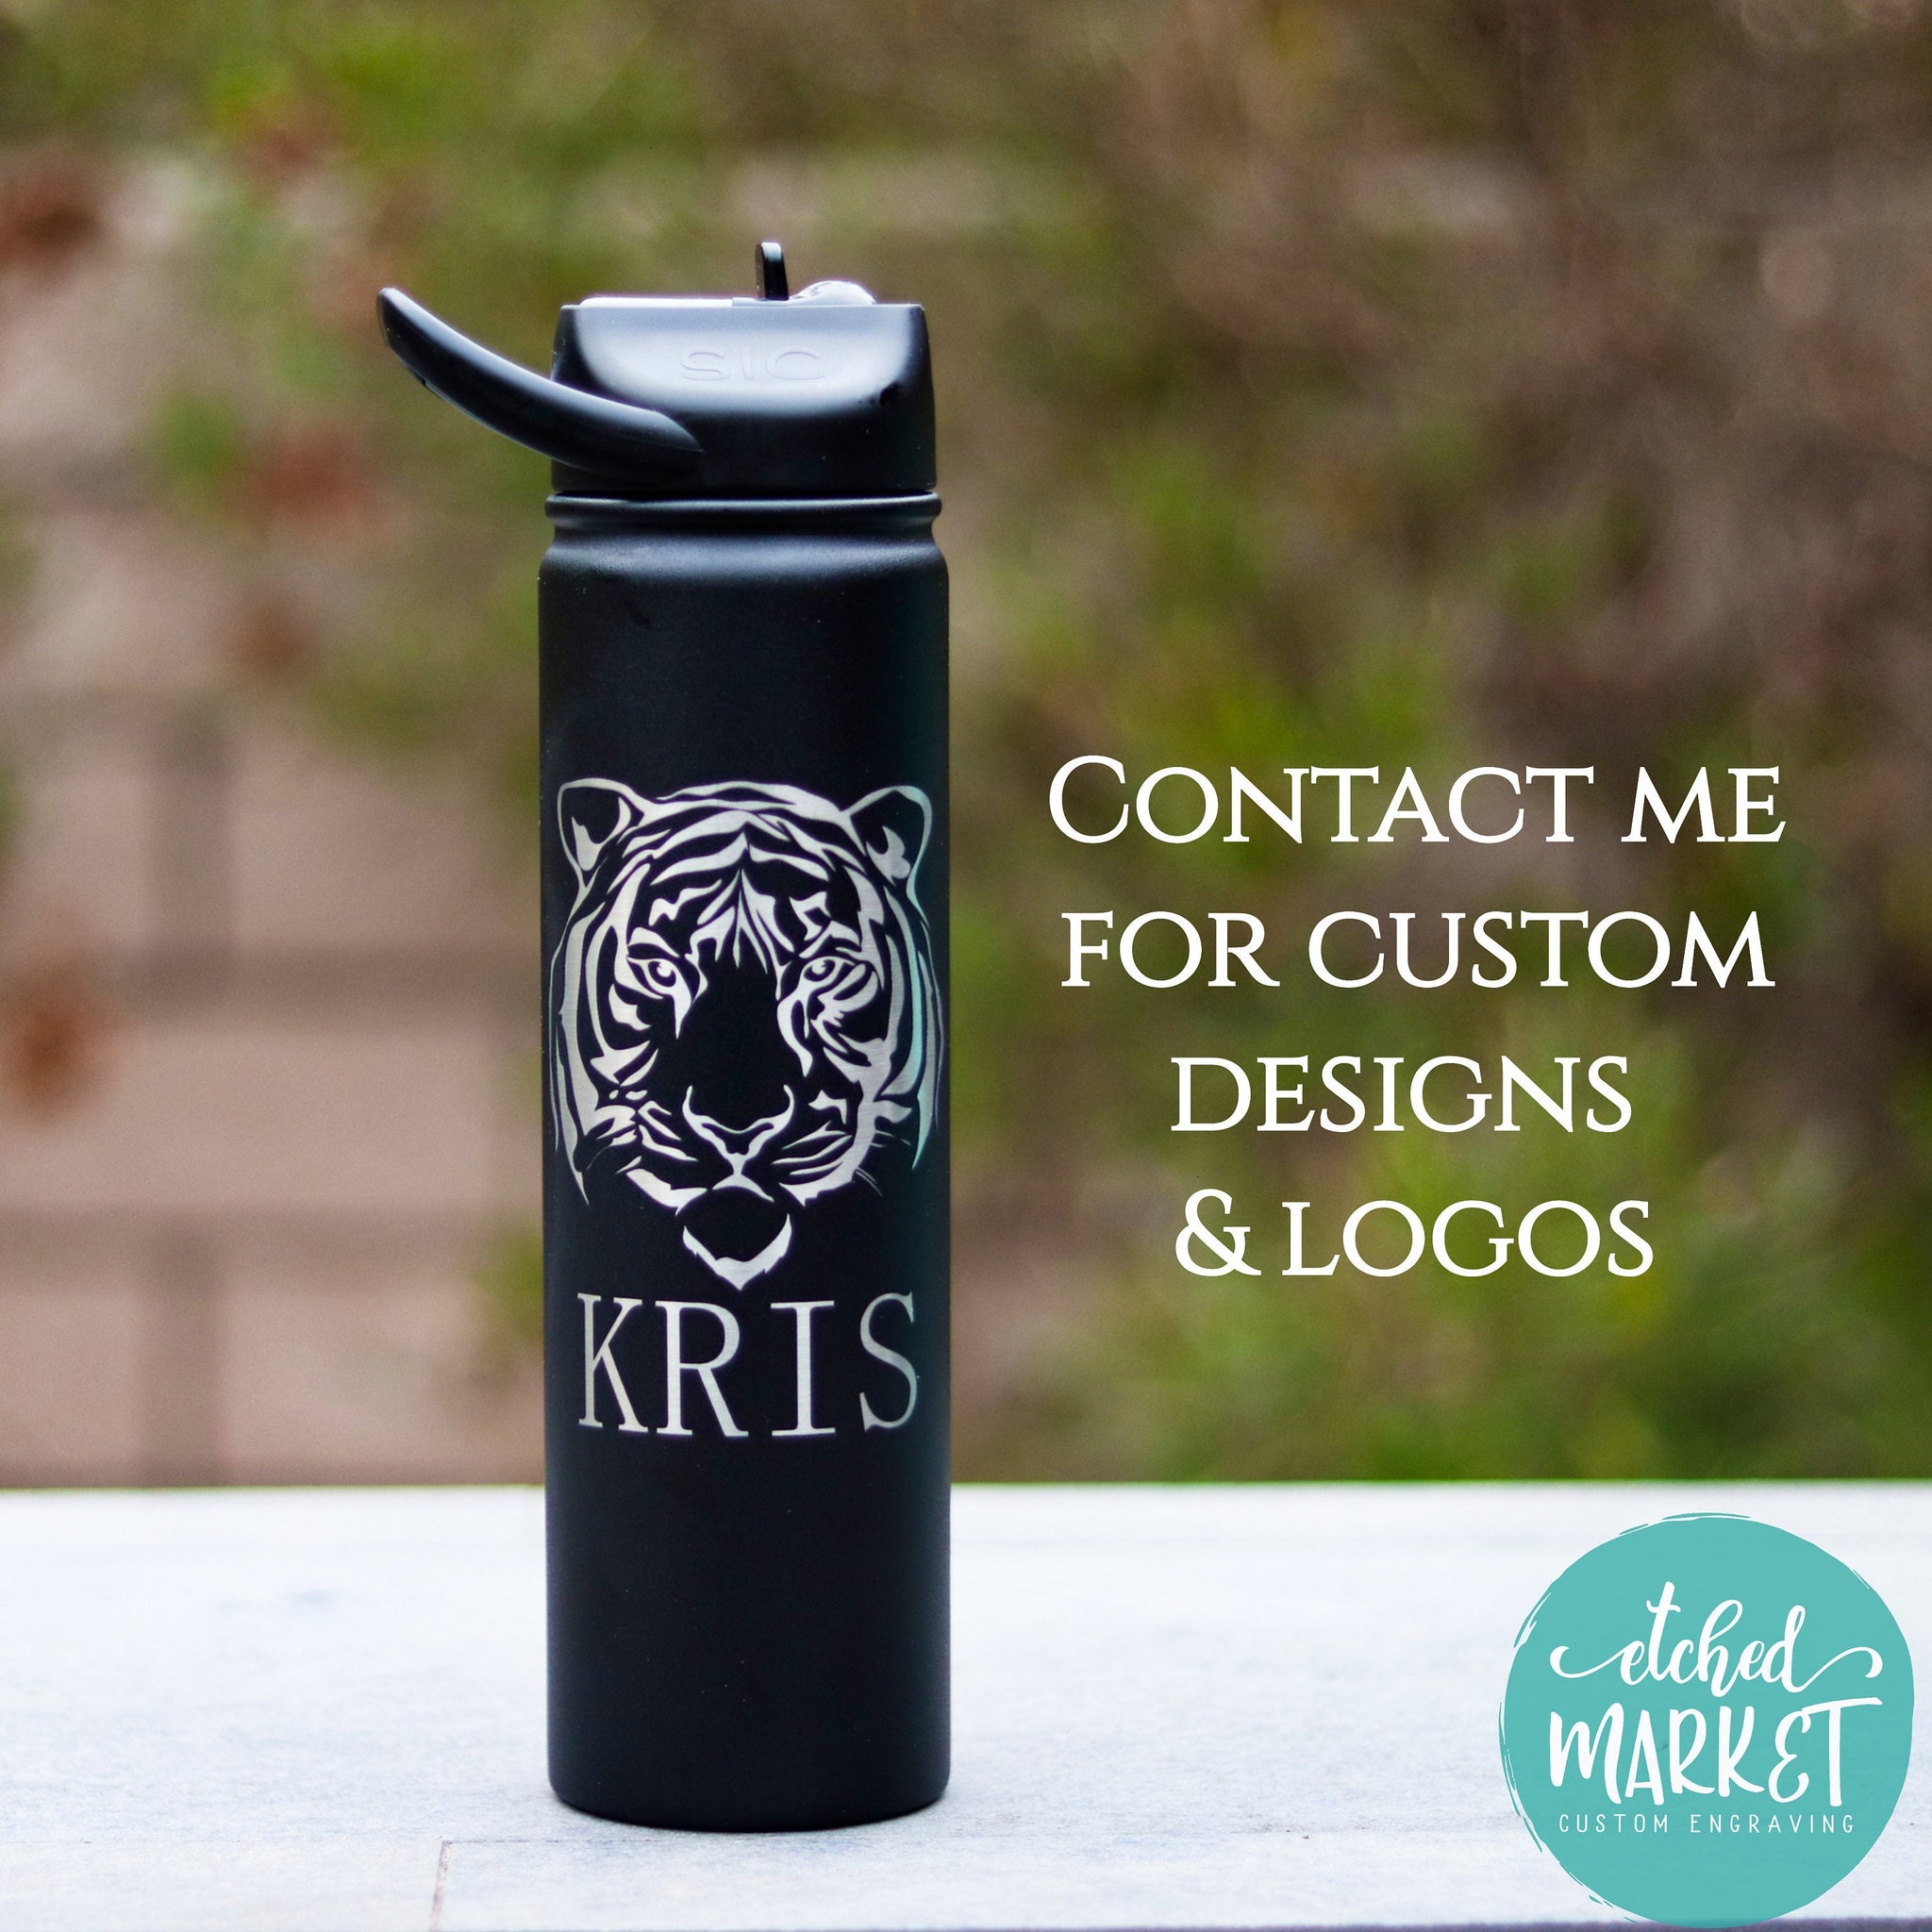 BULK 12 Engraved Personalized Steel Tumblers by Lifetime Creations